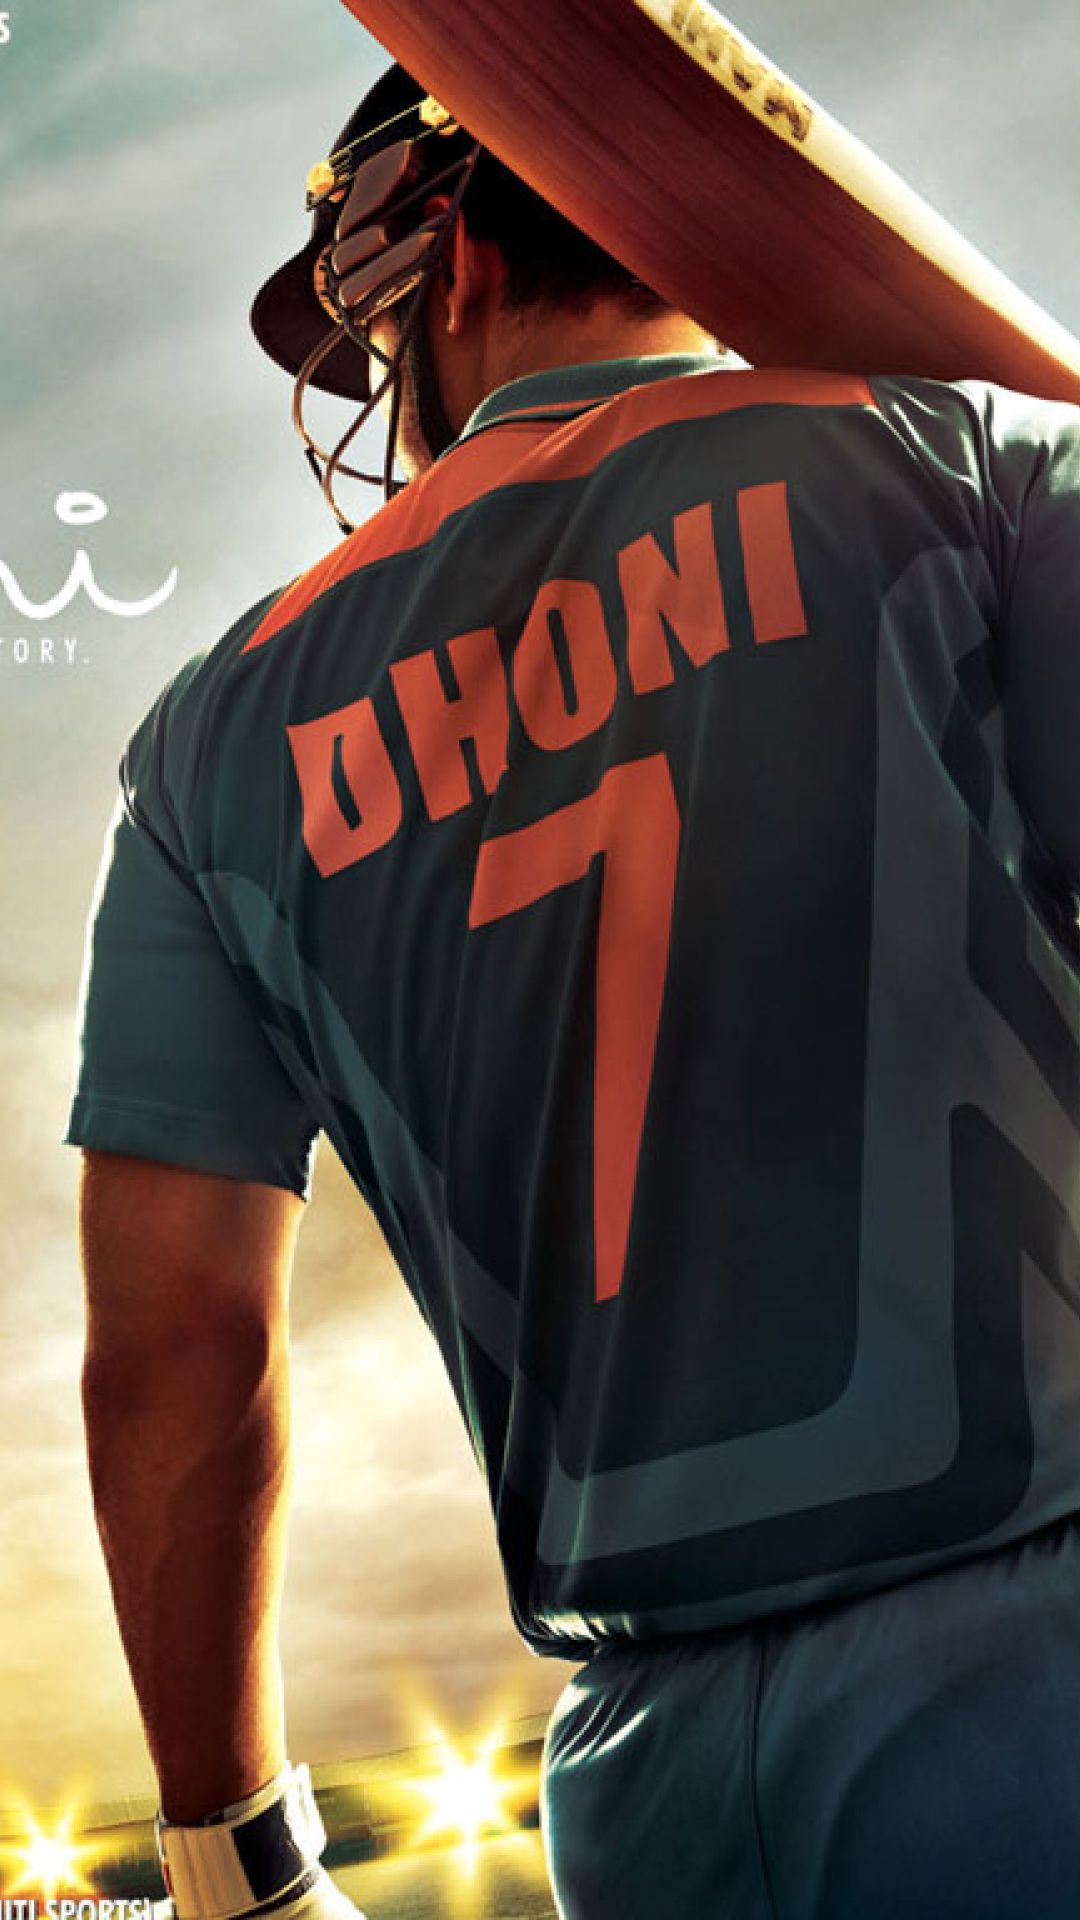 MS Dhoni Untold Story Poster iPhone 6s, 6 Plus and Pixel XL , One Plus 3t, 5 Wallpaper, HD Movies 4K Wallpaper, Image, Photo and Background